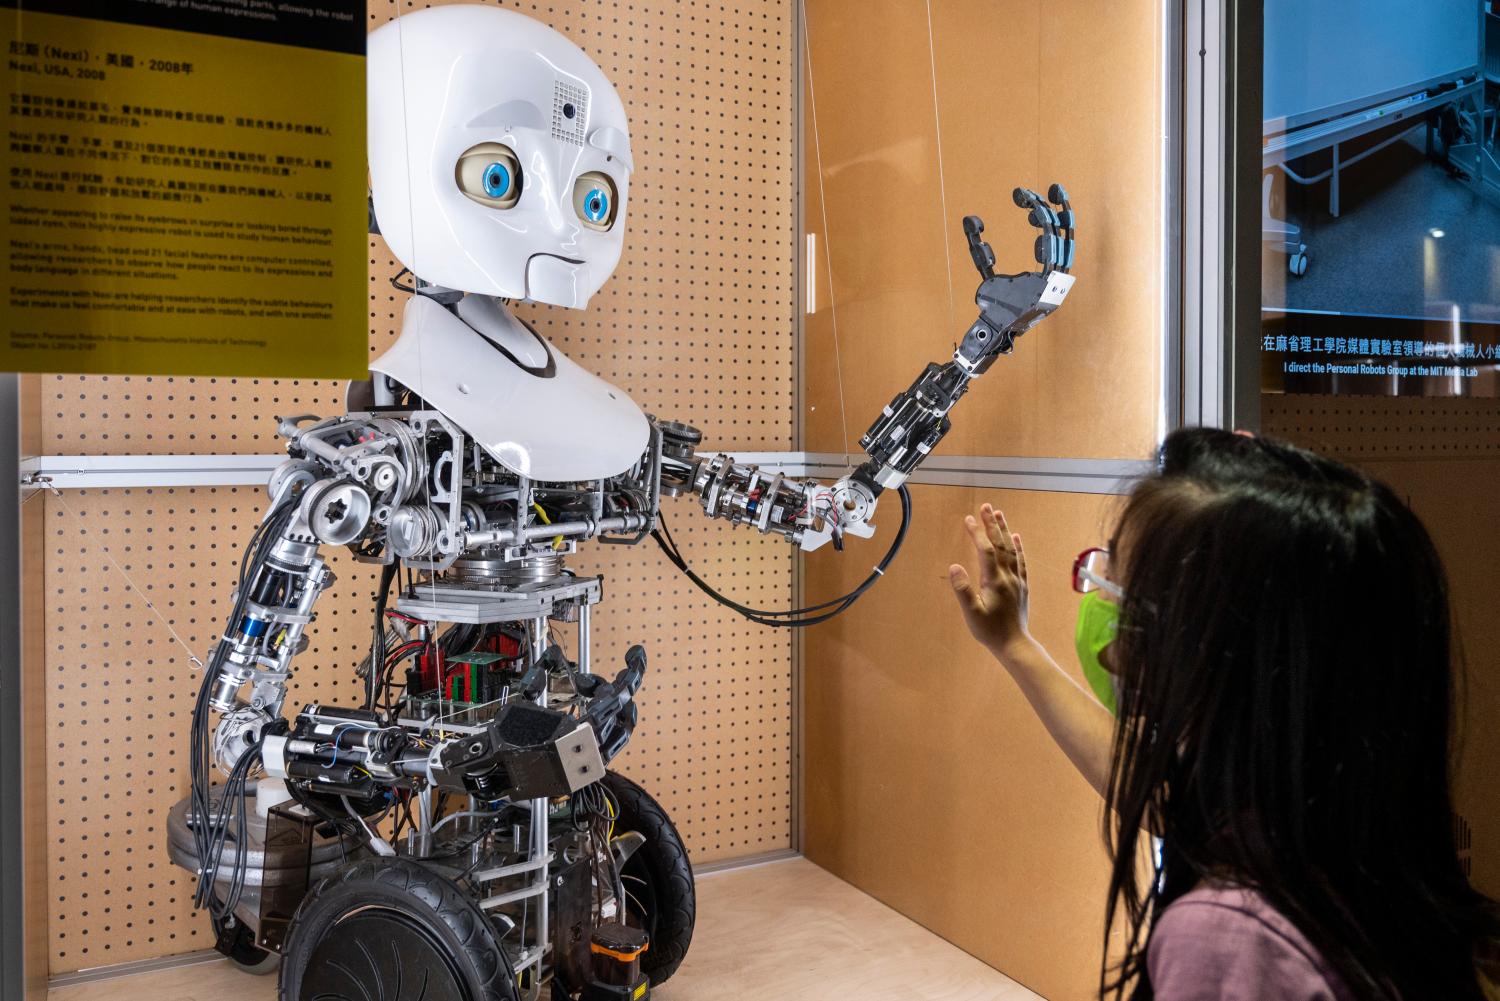 A young girl puts her hand up to a robot with a humanoid face and arm.